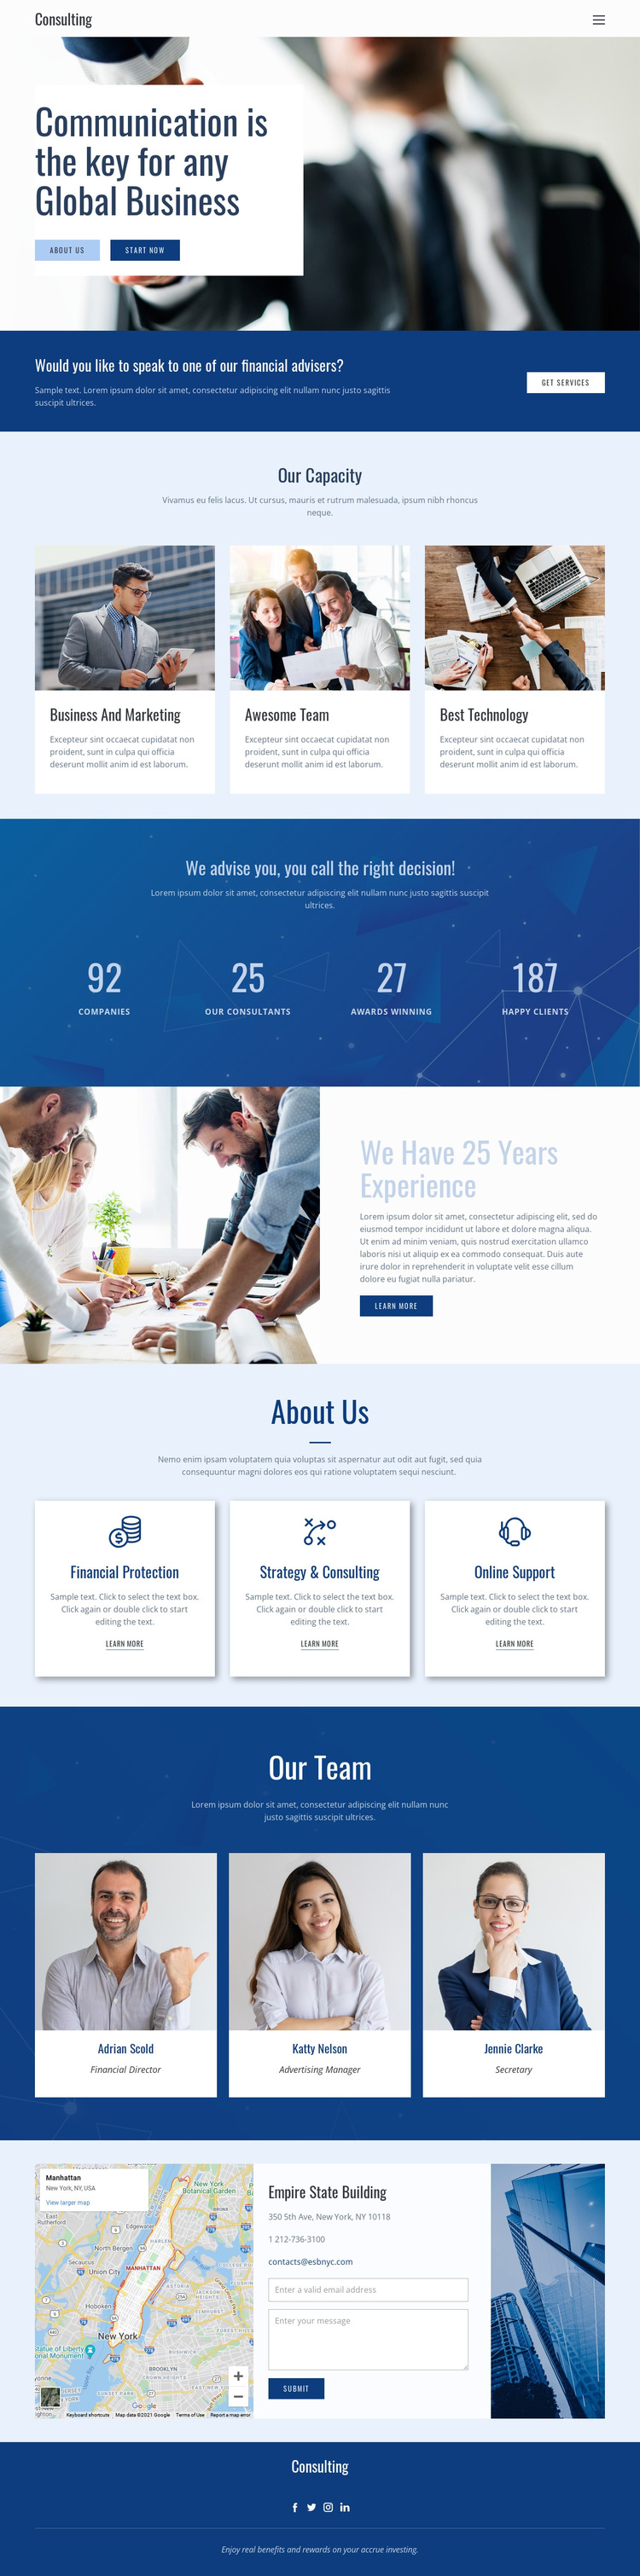 Key to global business HTML5 Template